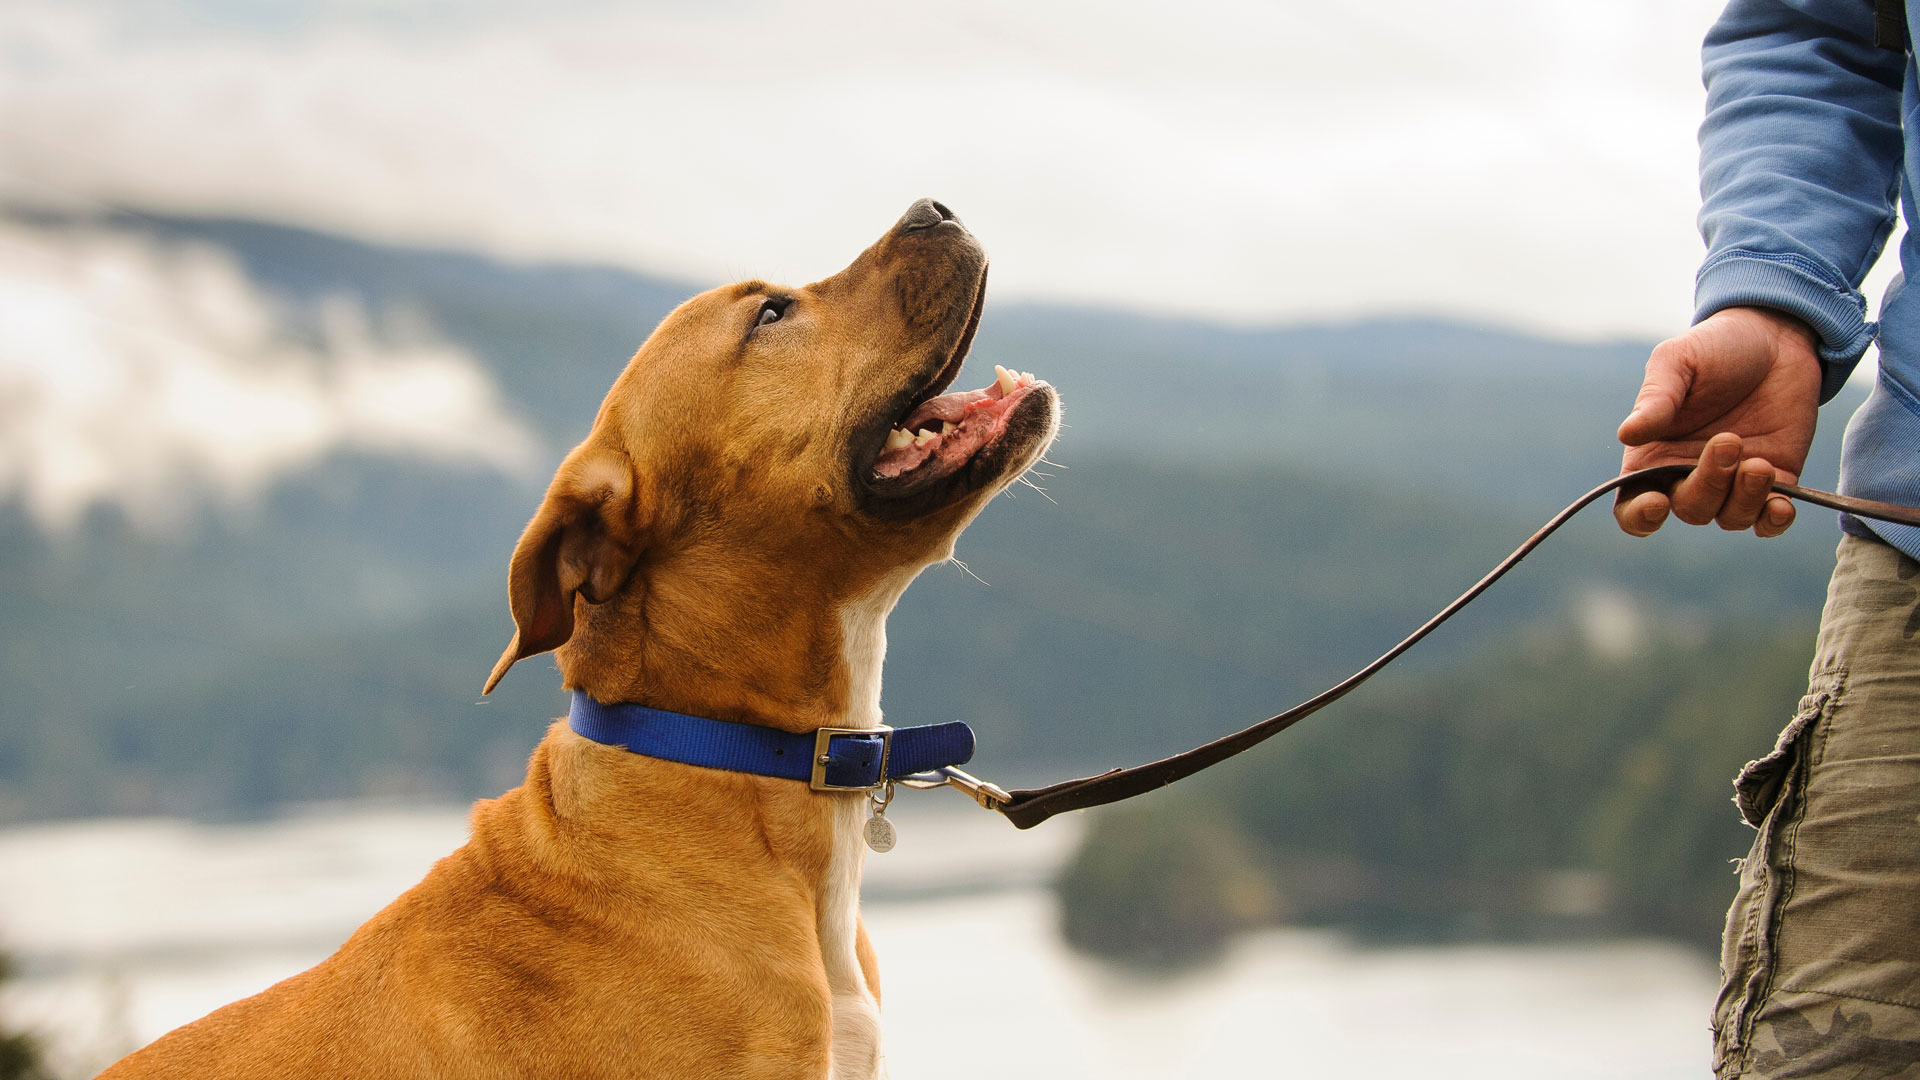 Dog trainer reveals we’ve been holding the leash wrong all this time, here’s why